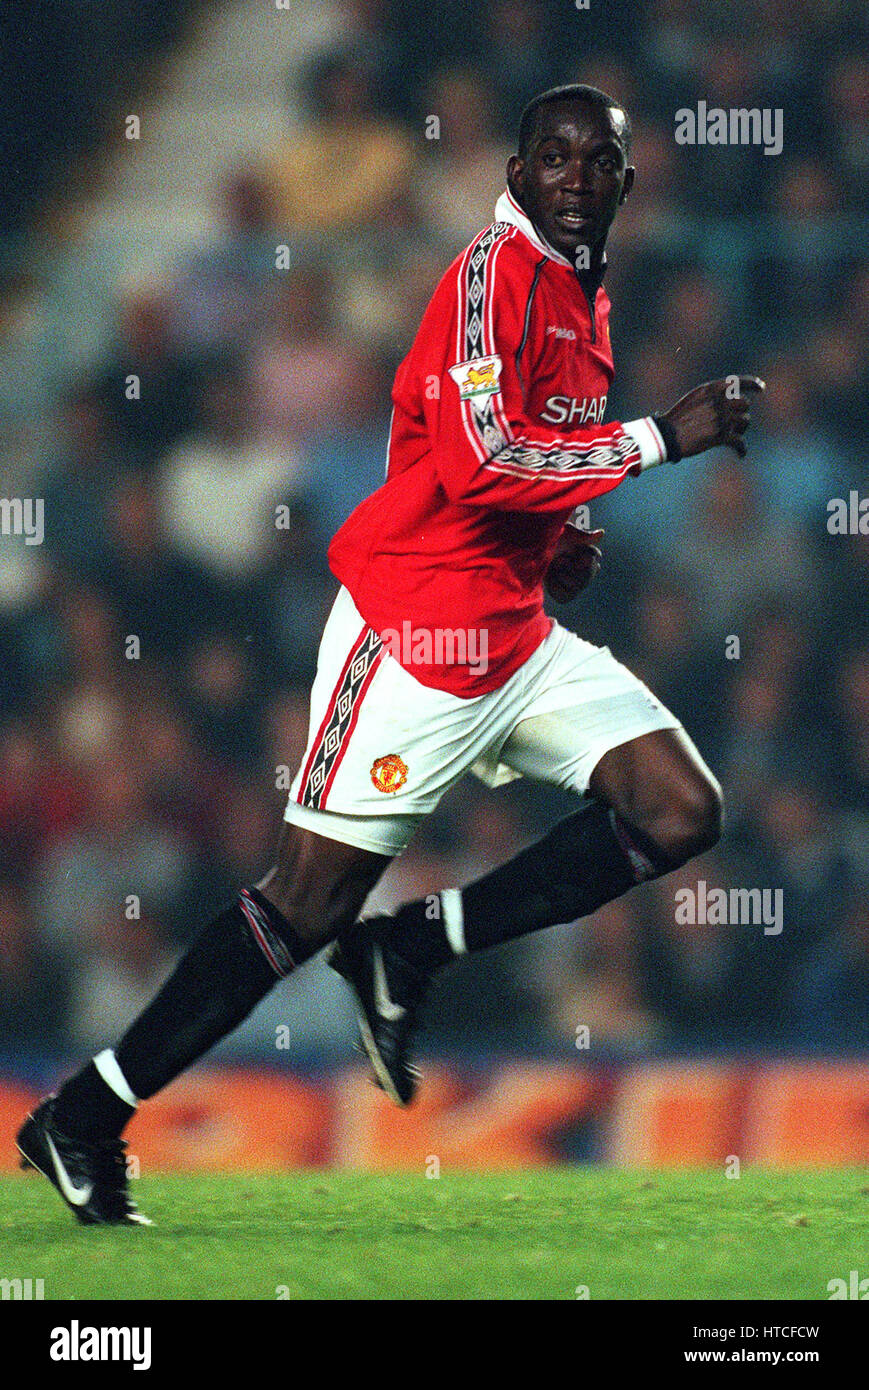 DWIGHT YORKE MANCHESTER UNITED FC 25 August 1999 Stock Photo